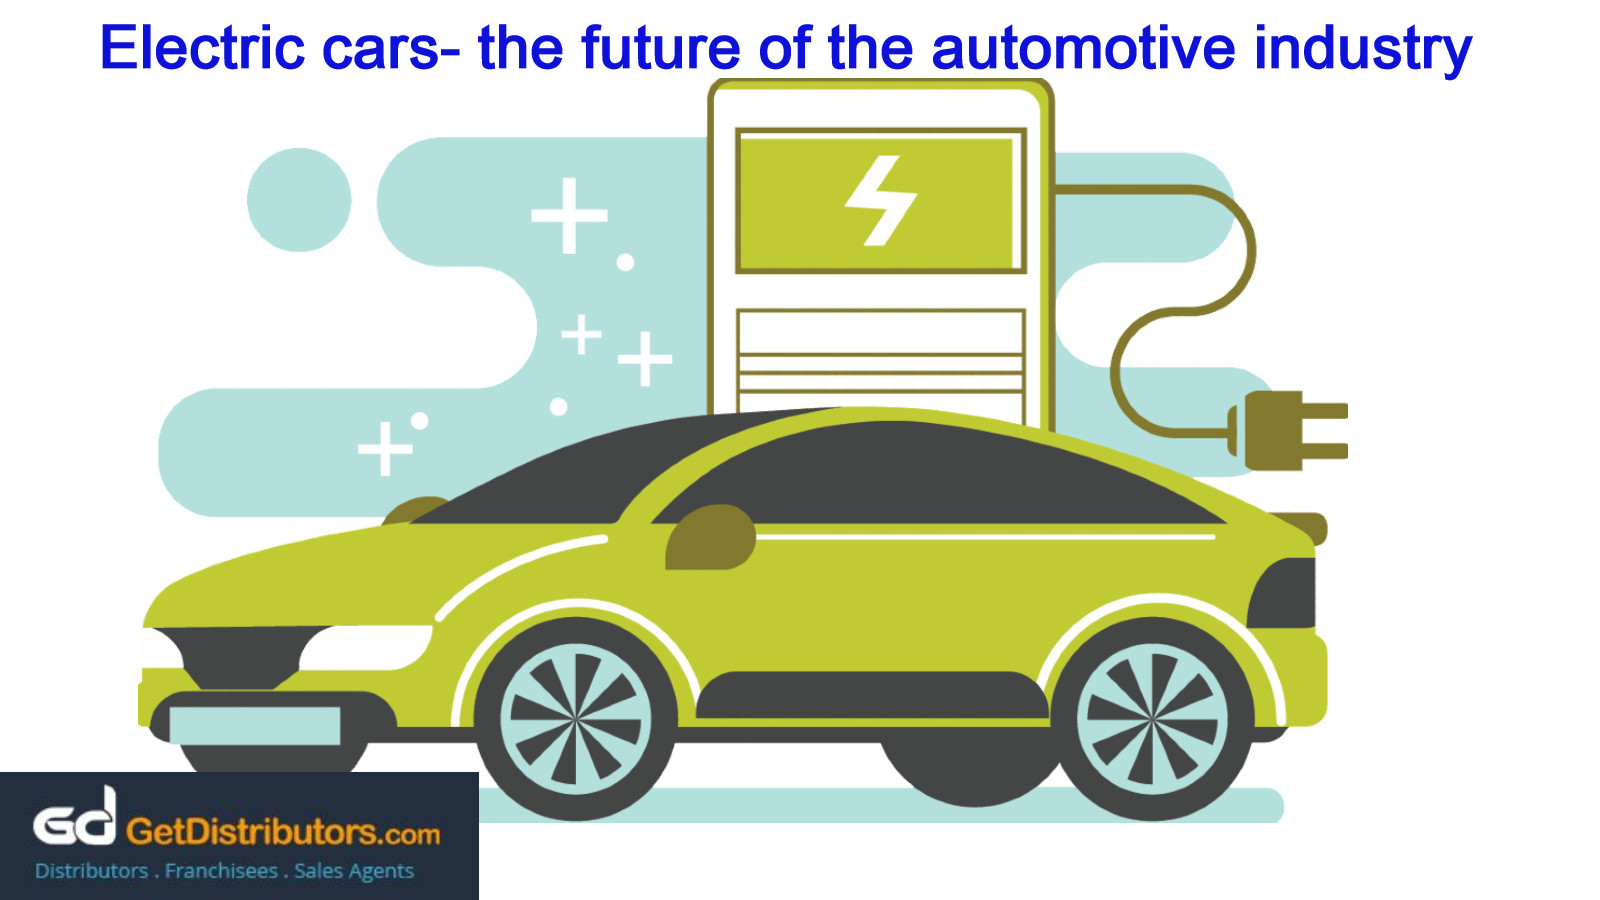 Electric cars – the future of the automotive industry